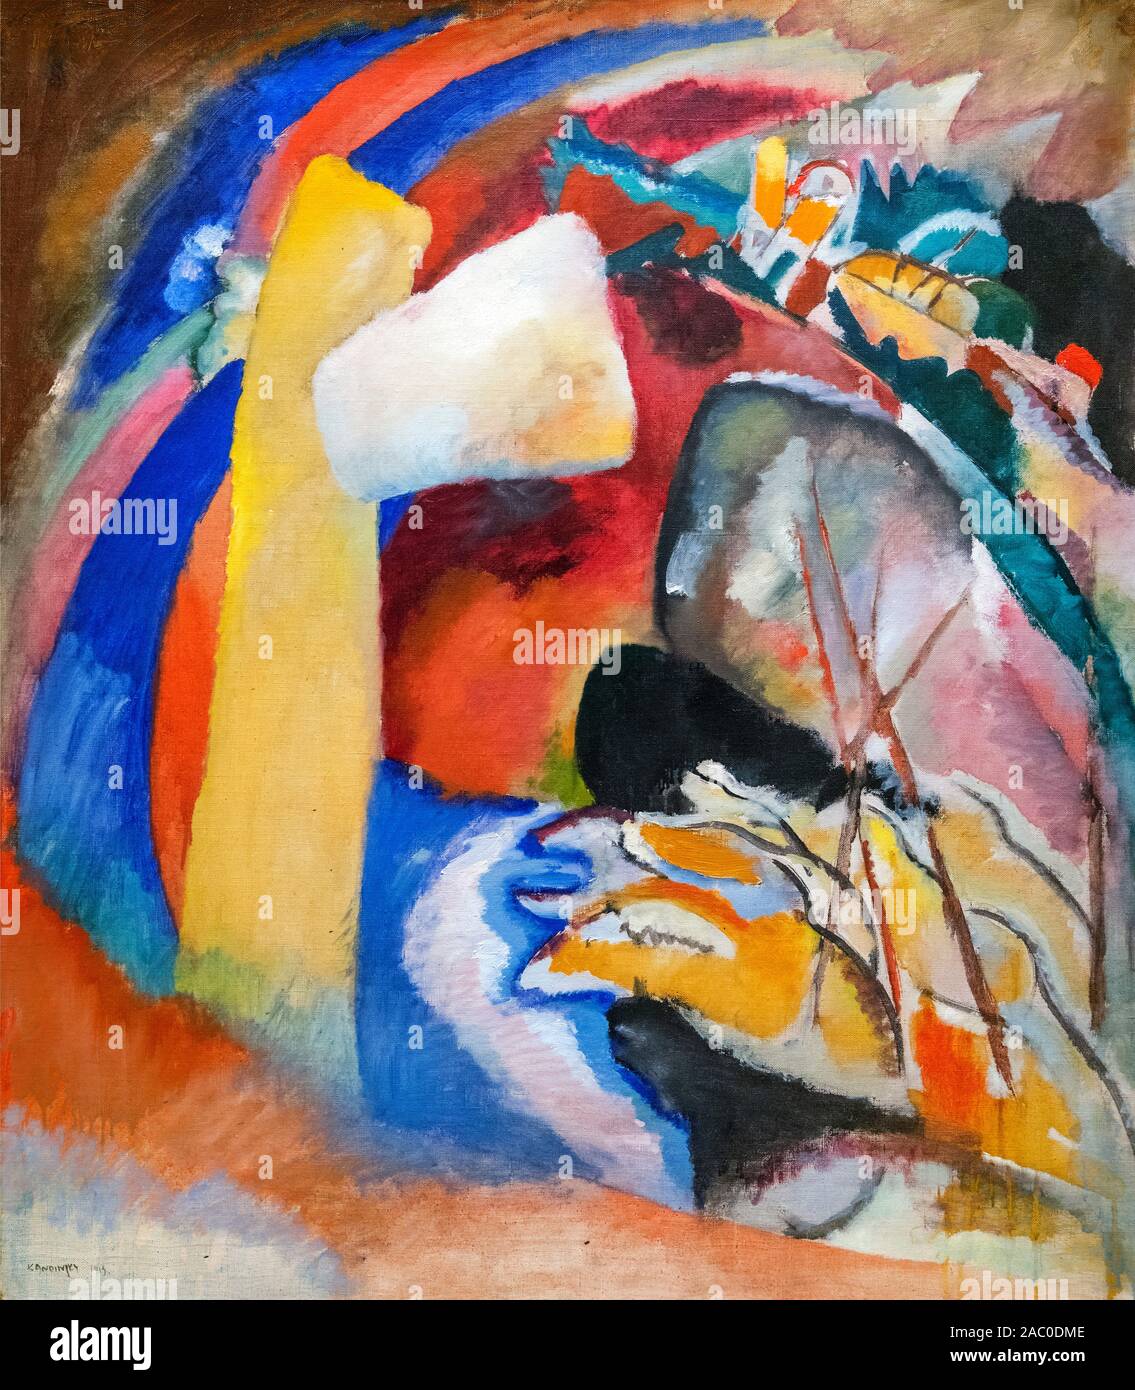 Kandinsky painting. Study for Painting with White Form by Wassily Kandinsky (1866-1944), oil on canvas, 1913 Stock Photo